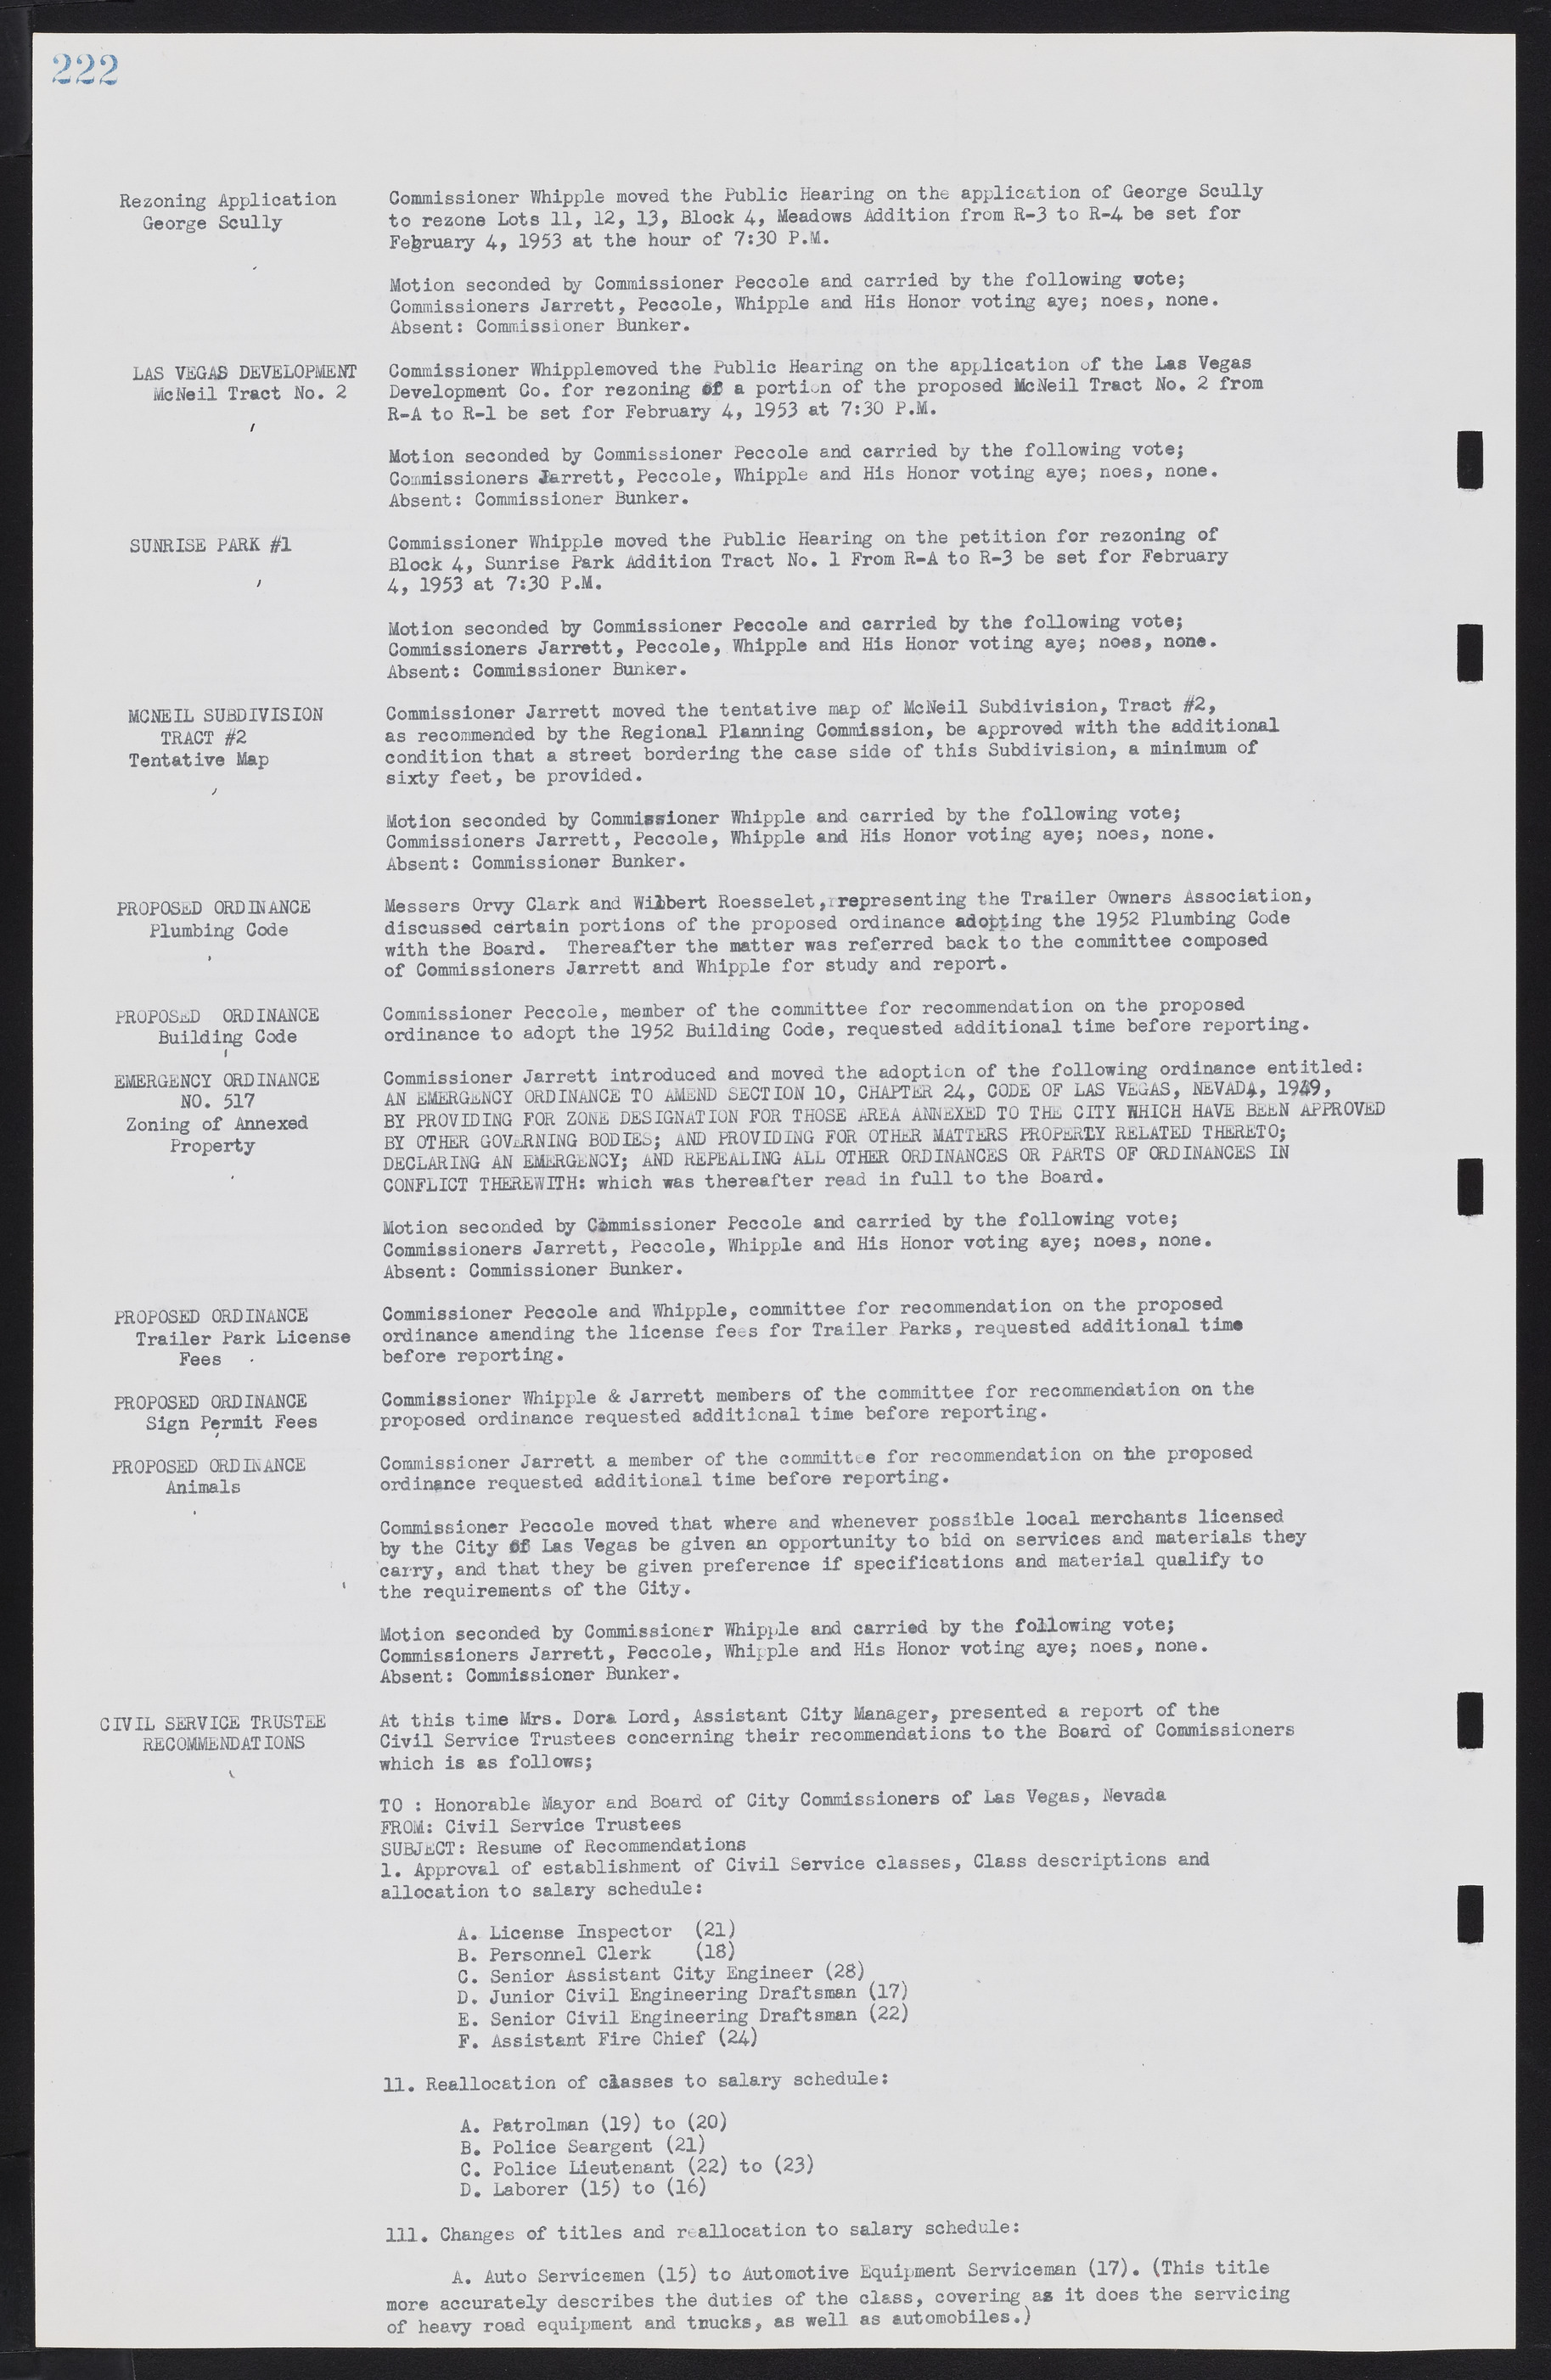 Las Vegas City Commission Minutes, May 26, 1952 to February 17, 1954, lvc000008-238